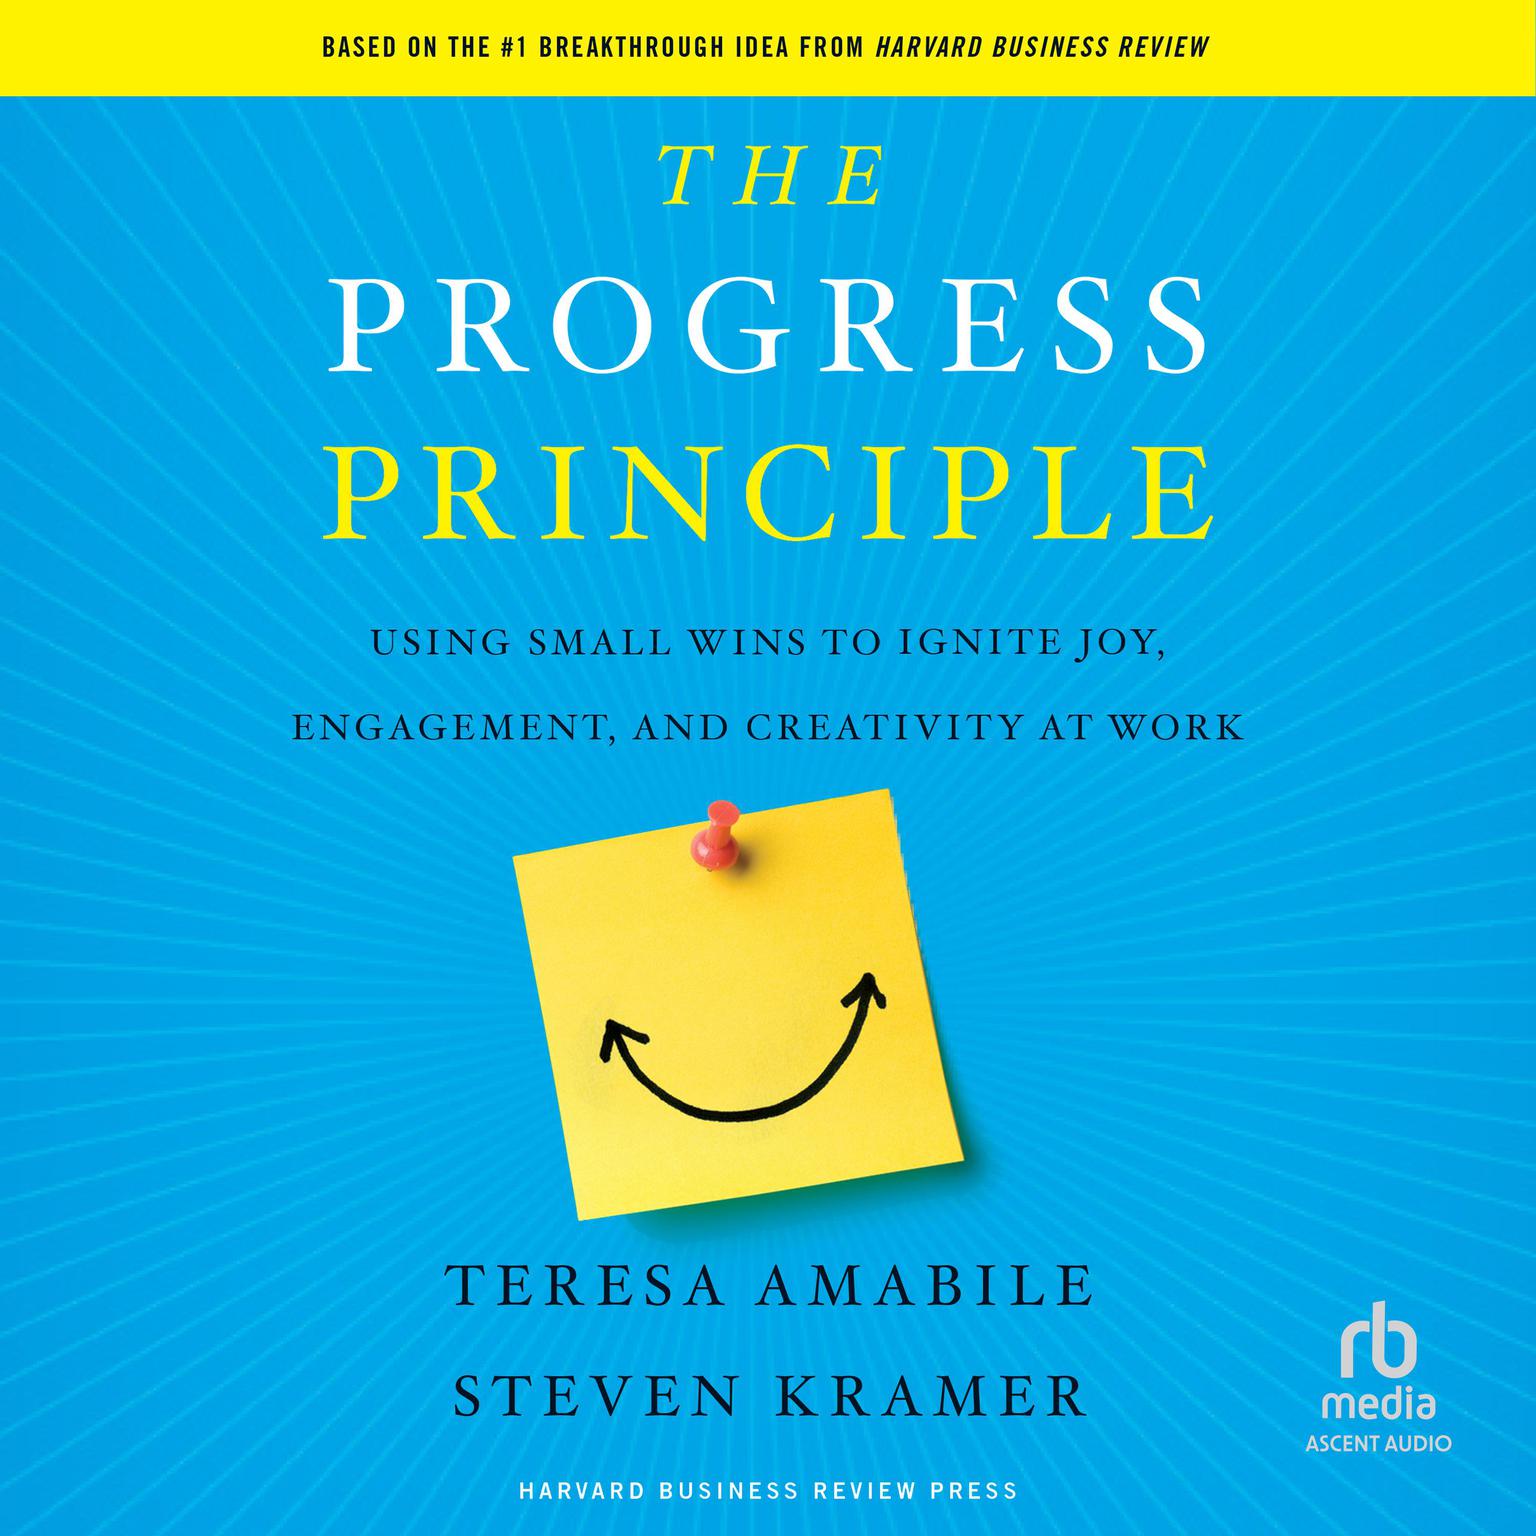 The Progress Principle: Using Small Wins to Ignite Joy, Engagement, and Creativity at Work Audiobook, by Teresa Amabile